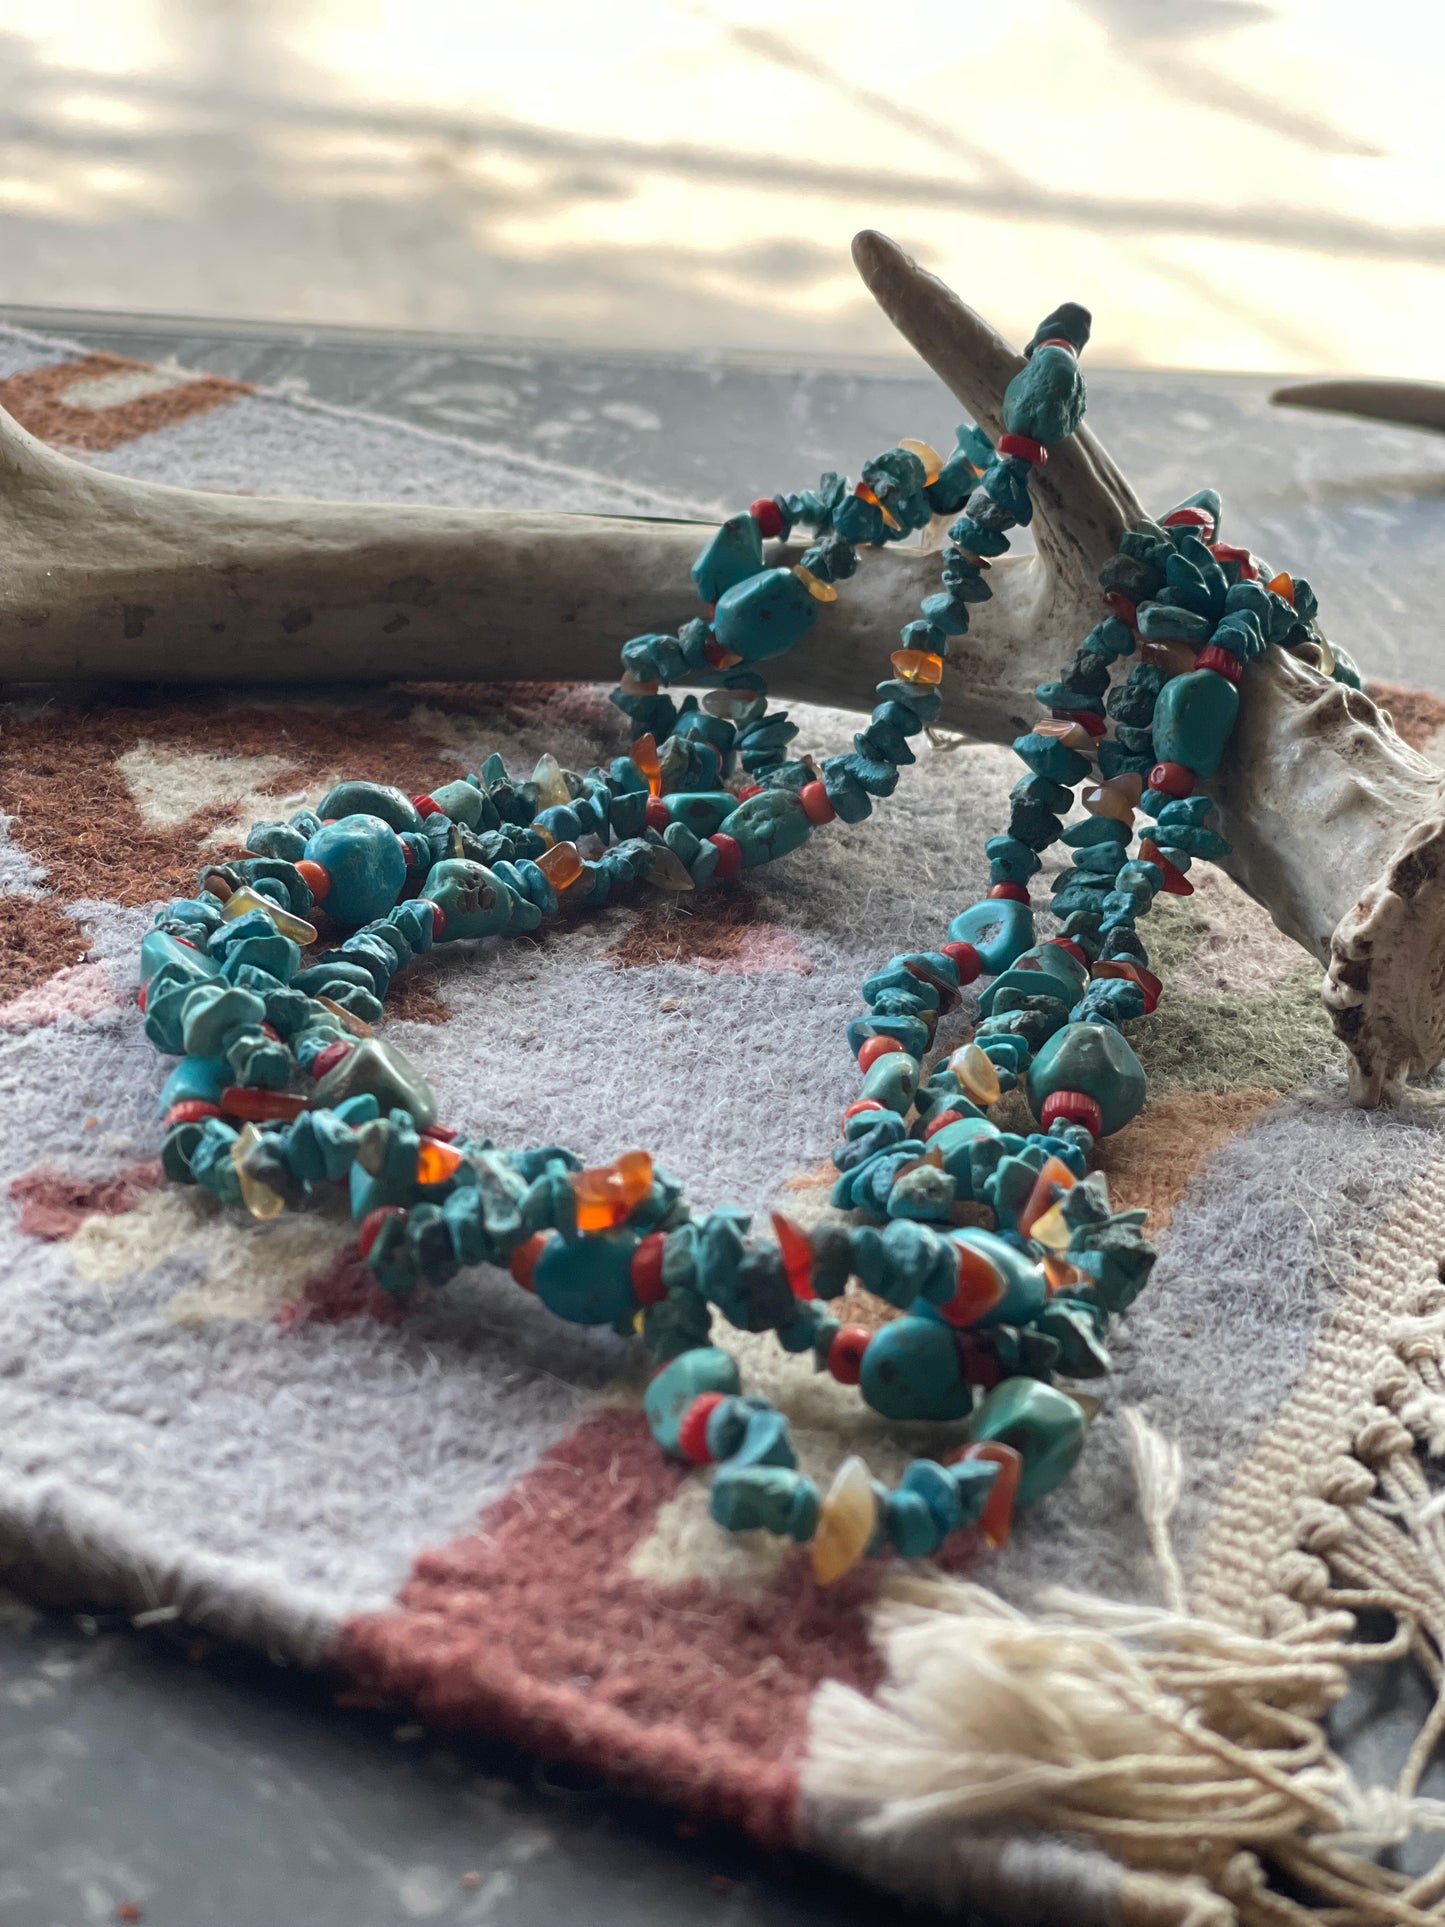 CHUNKY TURQUOISE NECKLACE